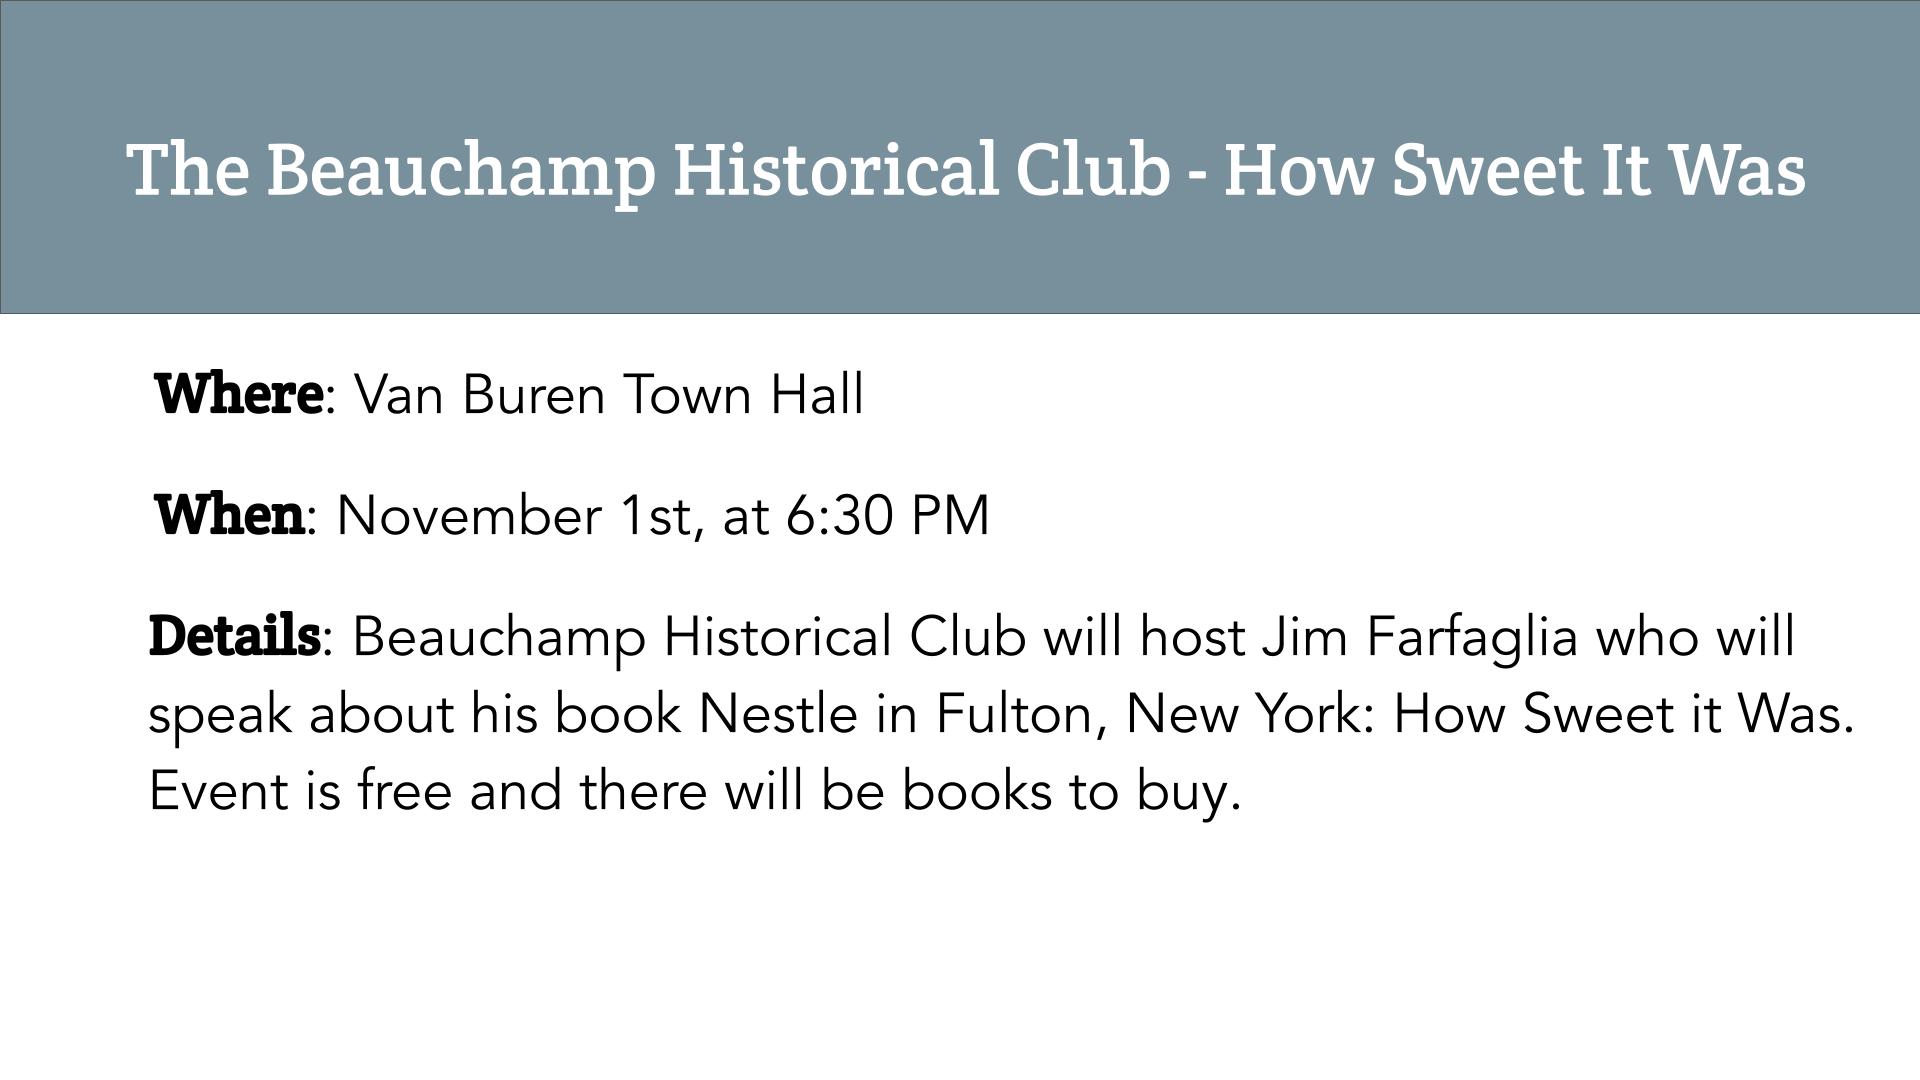 Beauchamp Historical Club - How Sweet it Was